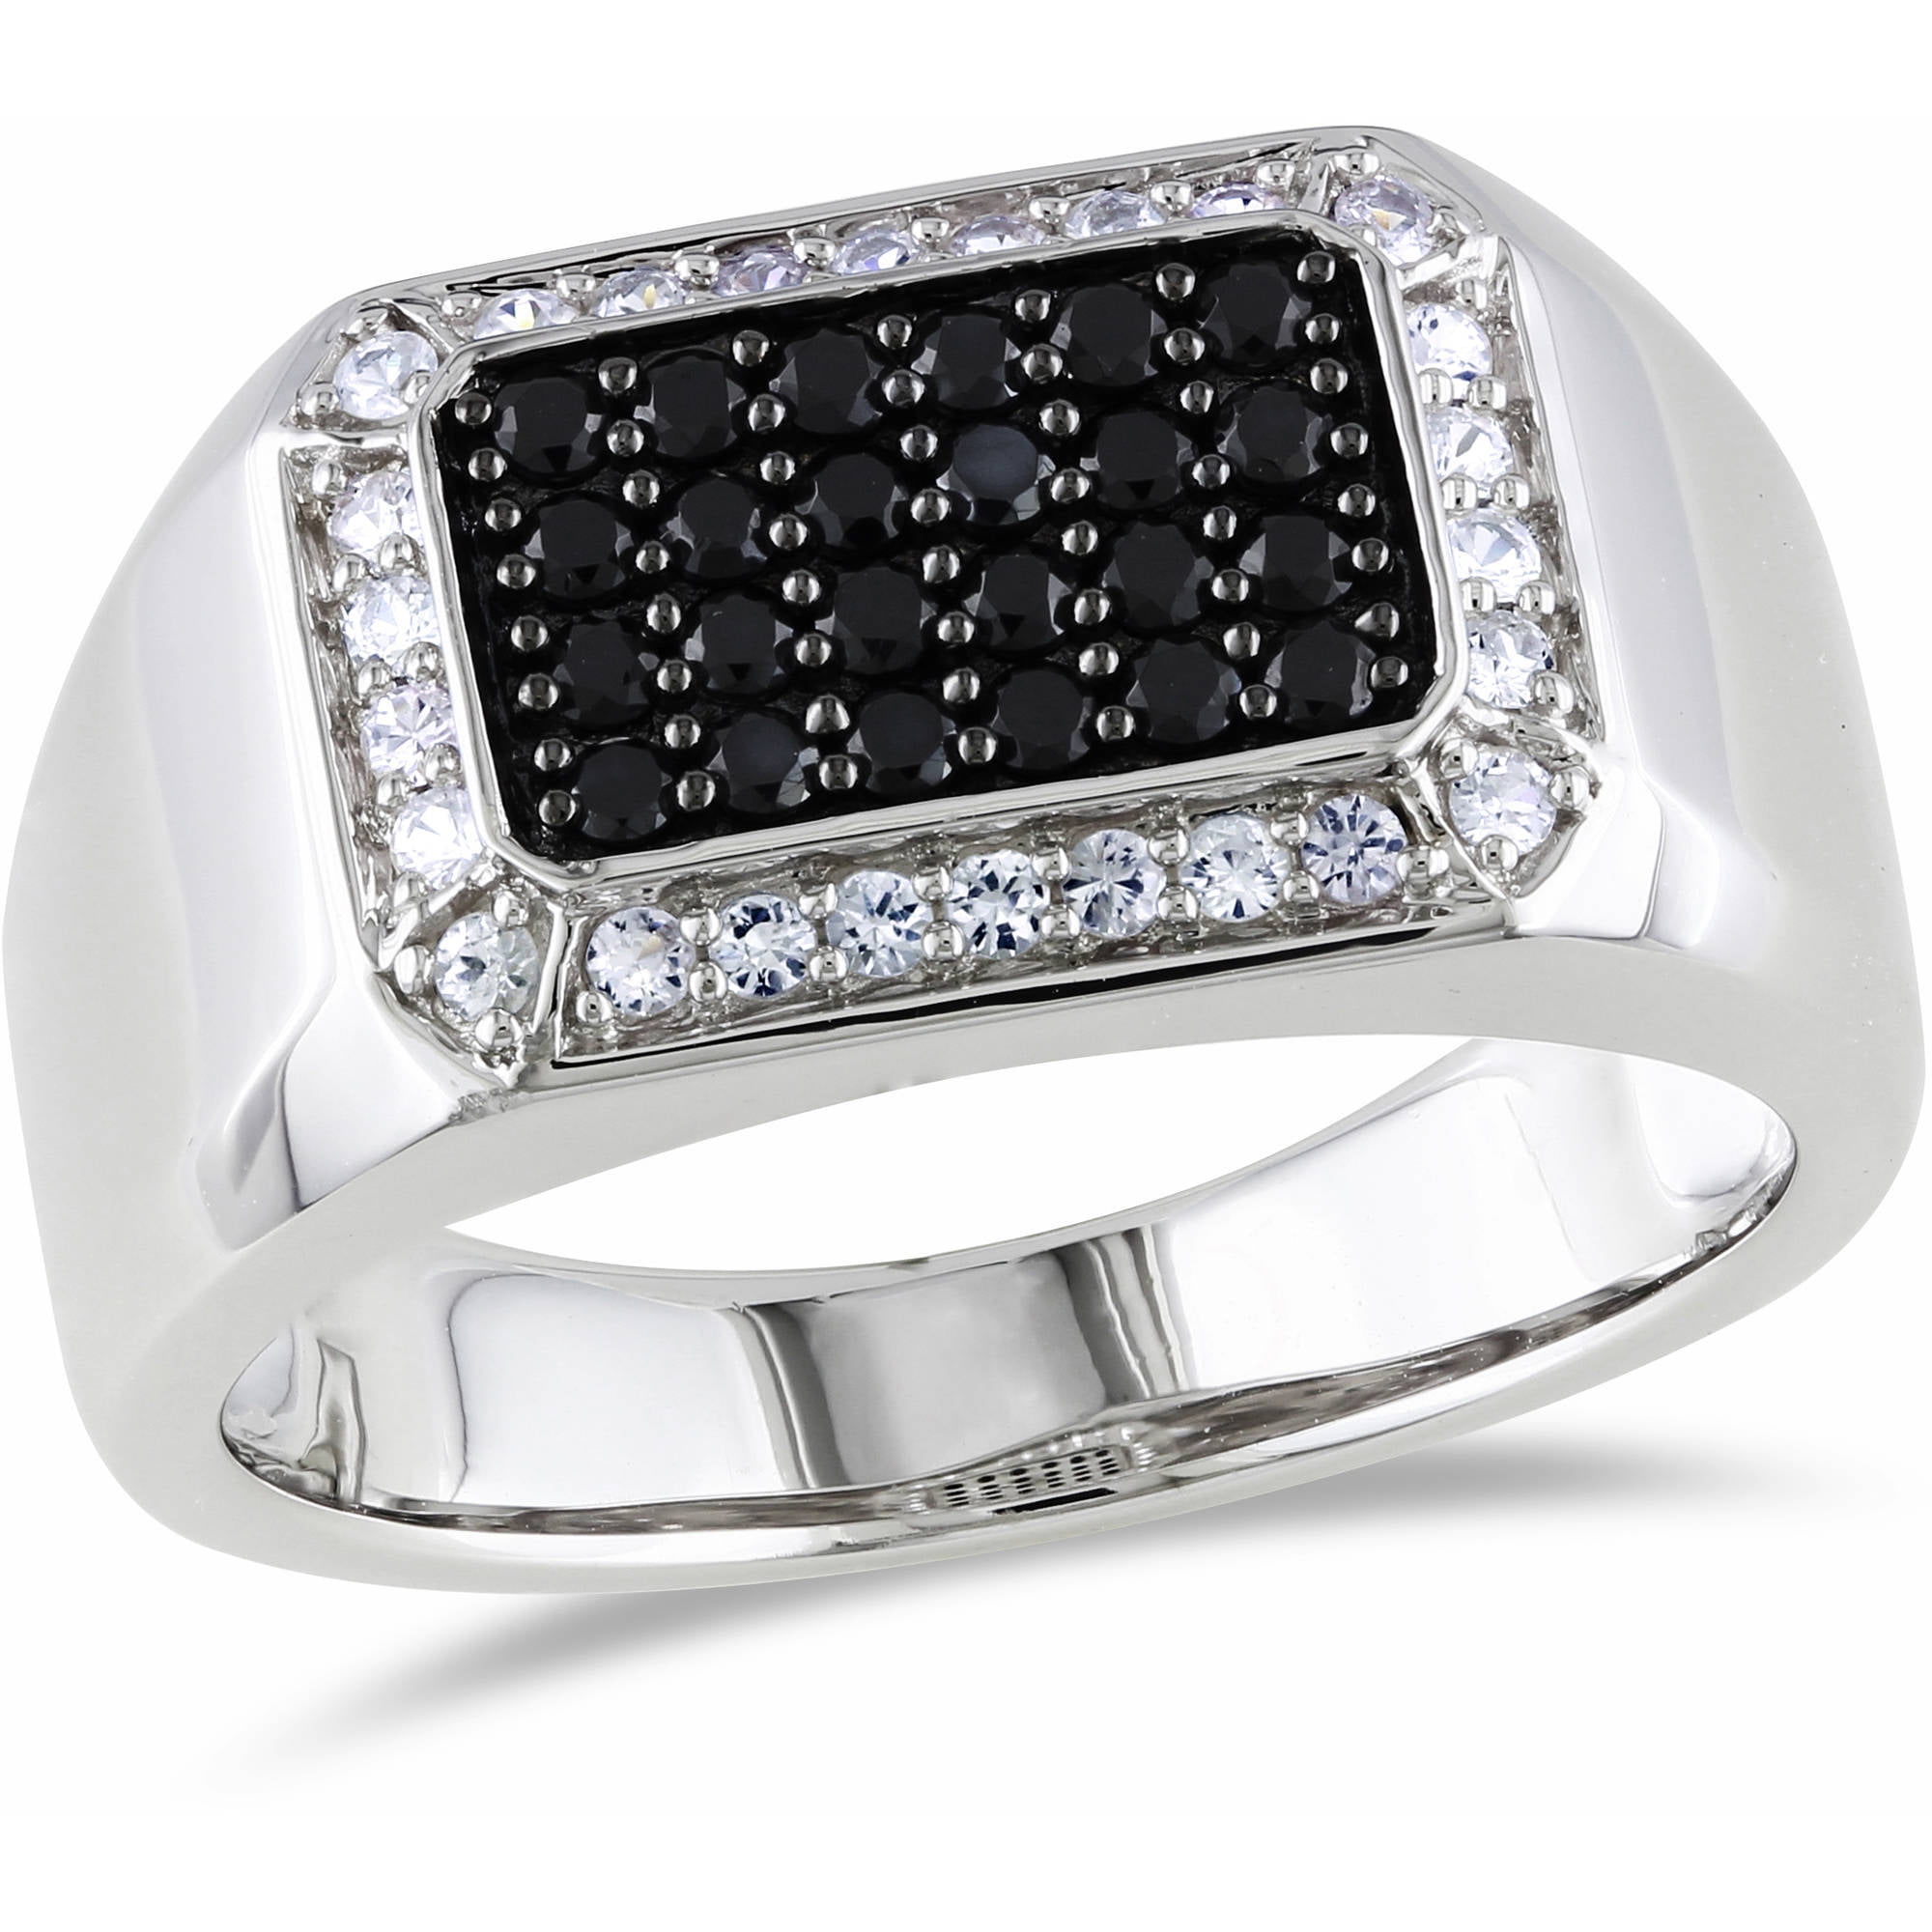 Men's 7/8 Carat T.G.W. Black Spinel and White Sapphire Sterling Silver ...